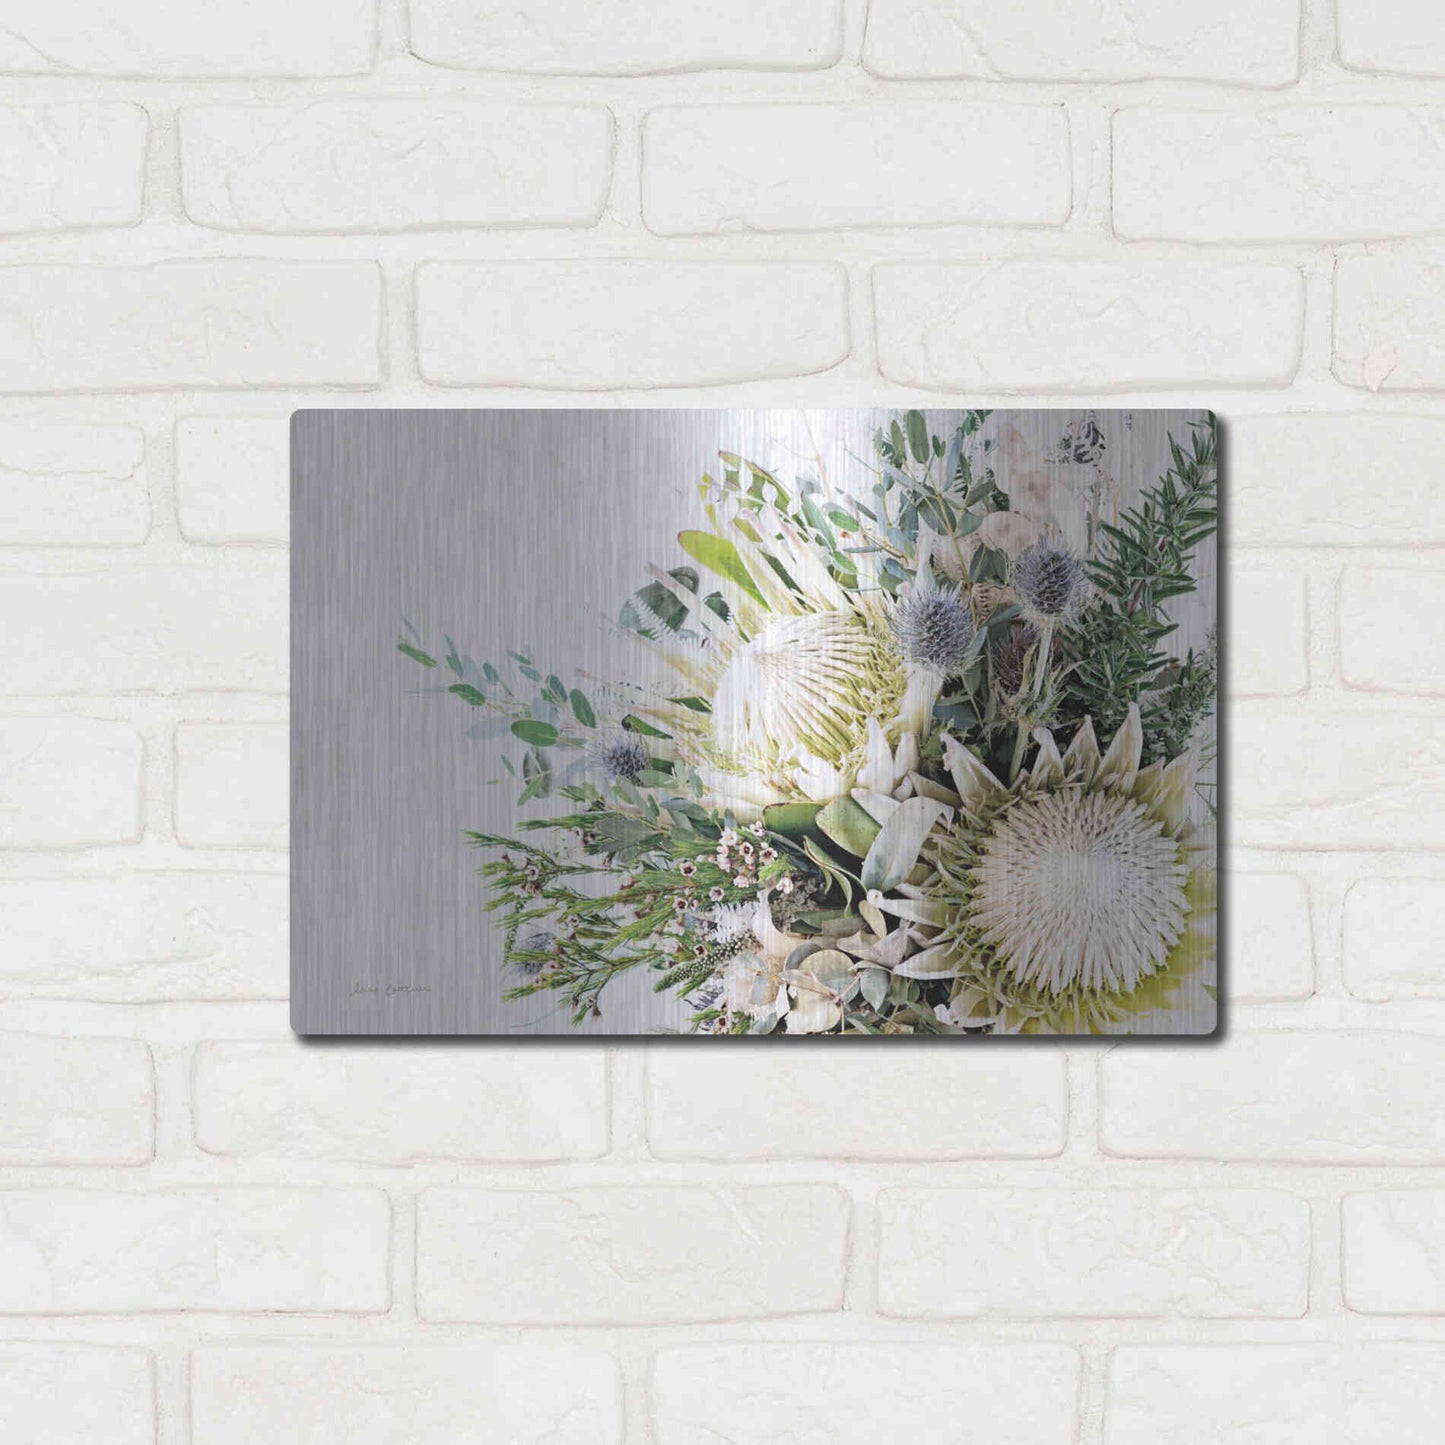 Luxe Metal Art 'Protea Bouquet I' by Elise Catterall, Metal Wall Art,16x12